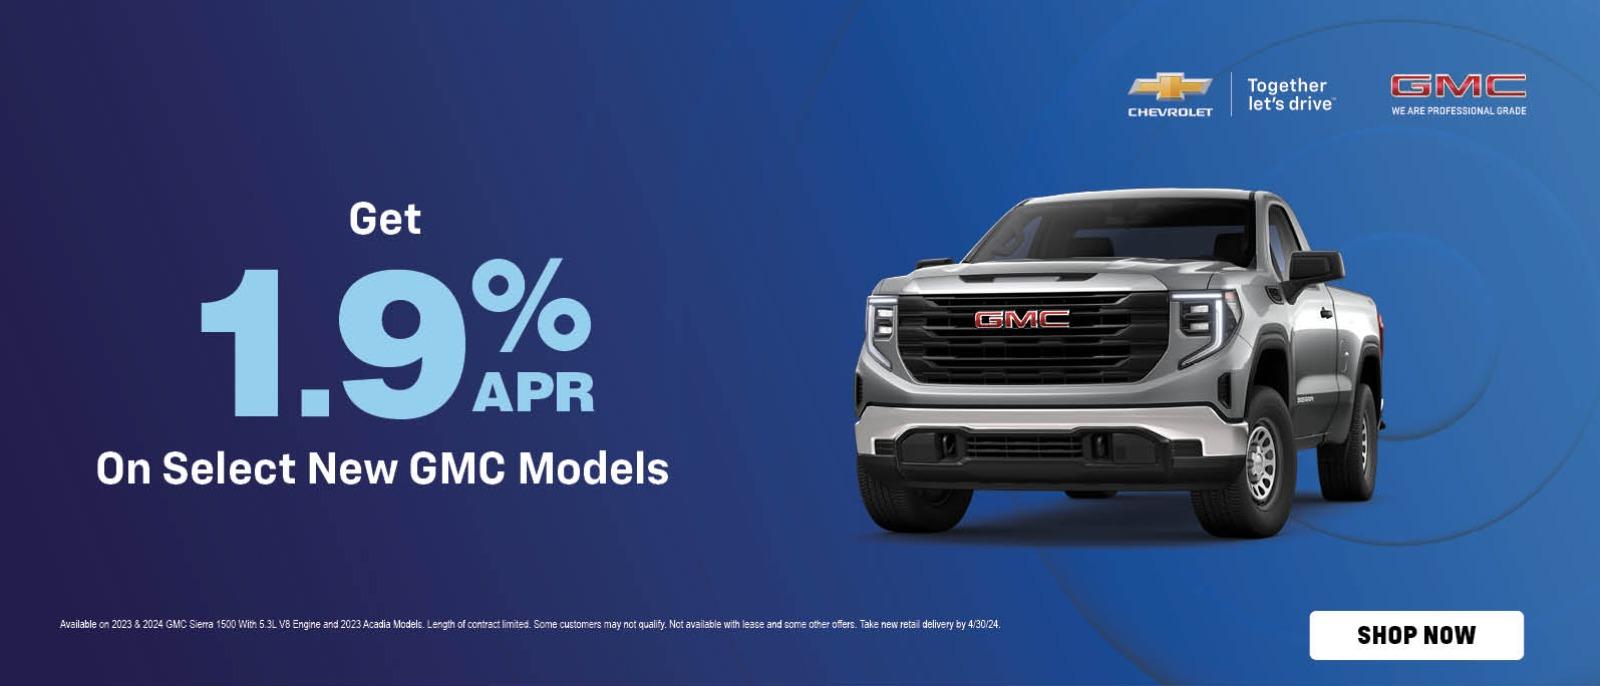 get 1.9% apr on select new gmc models